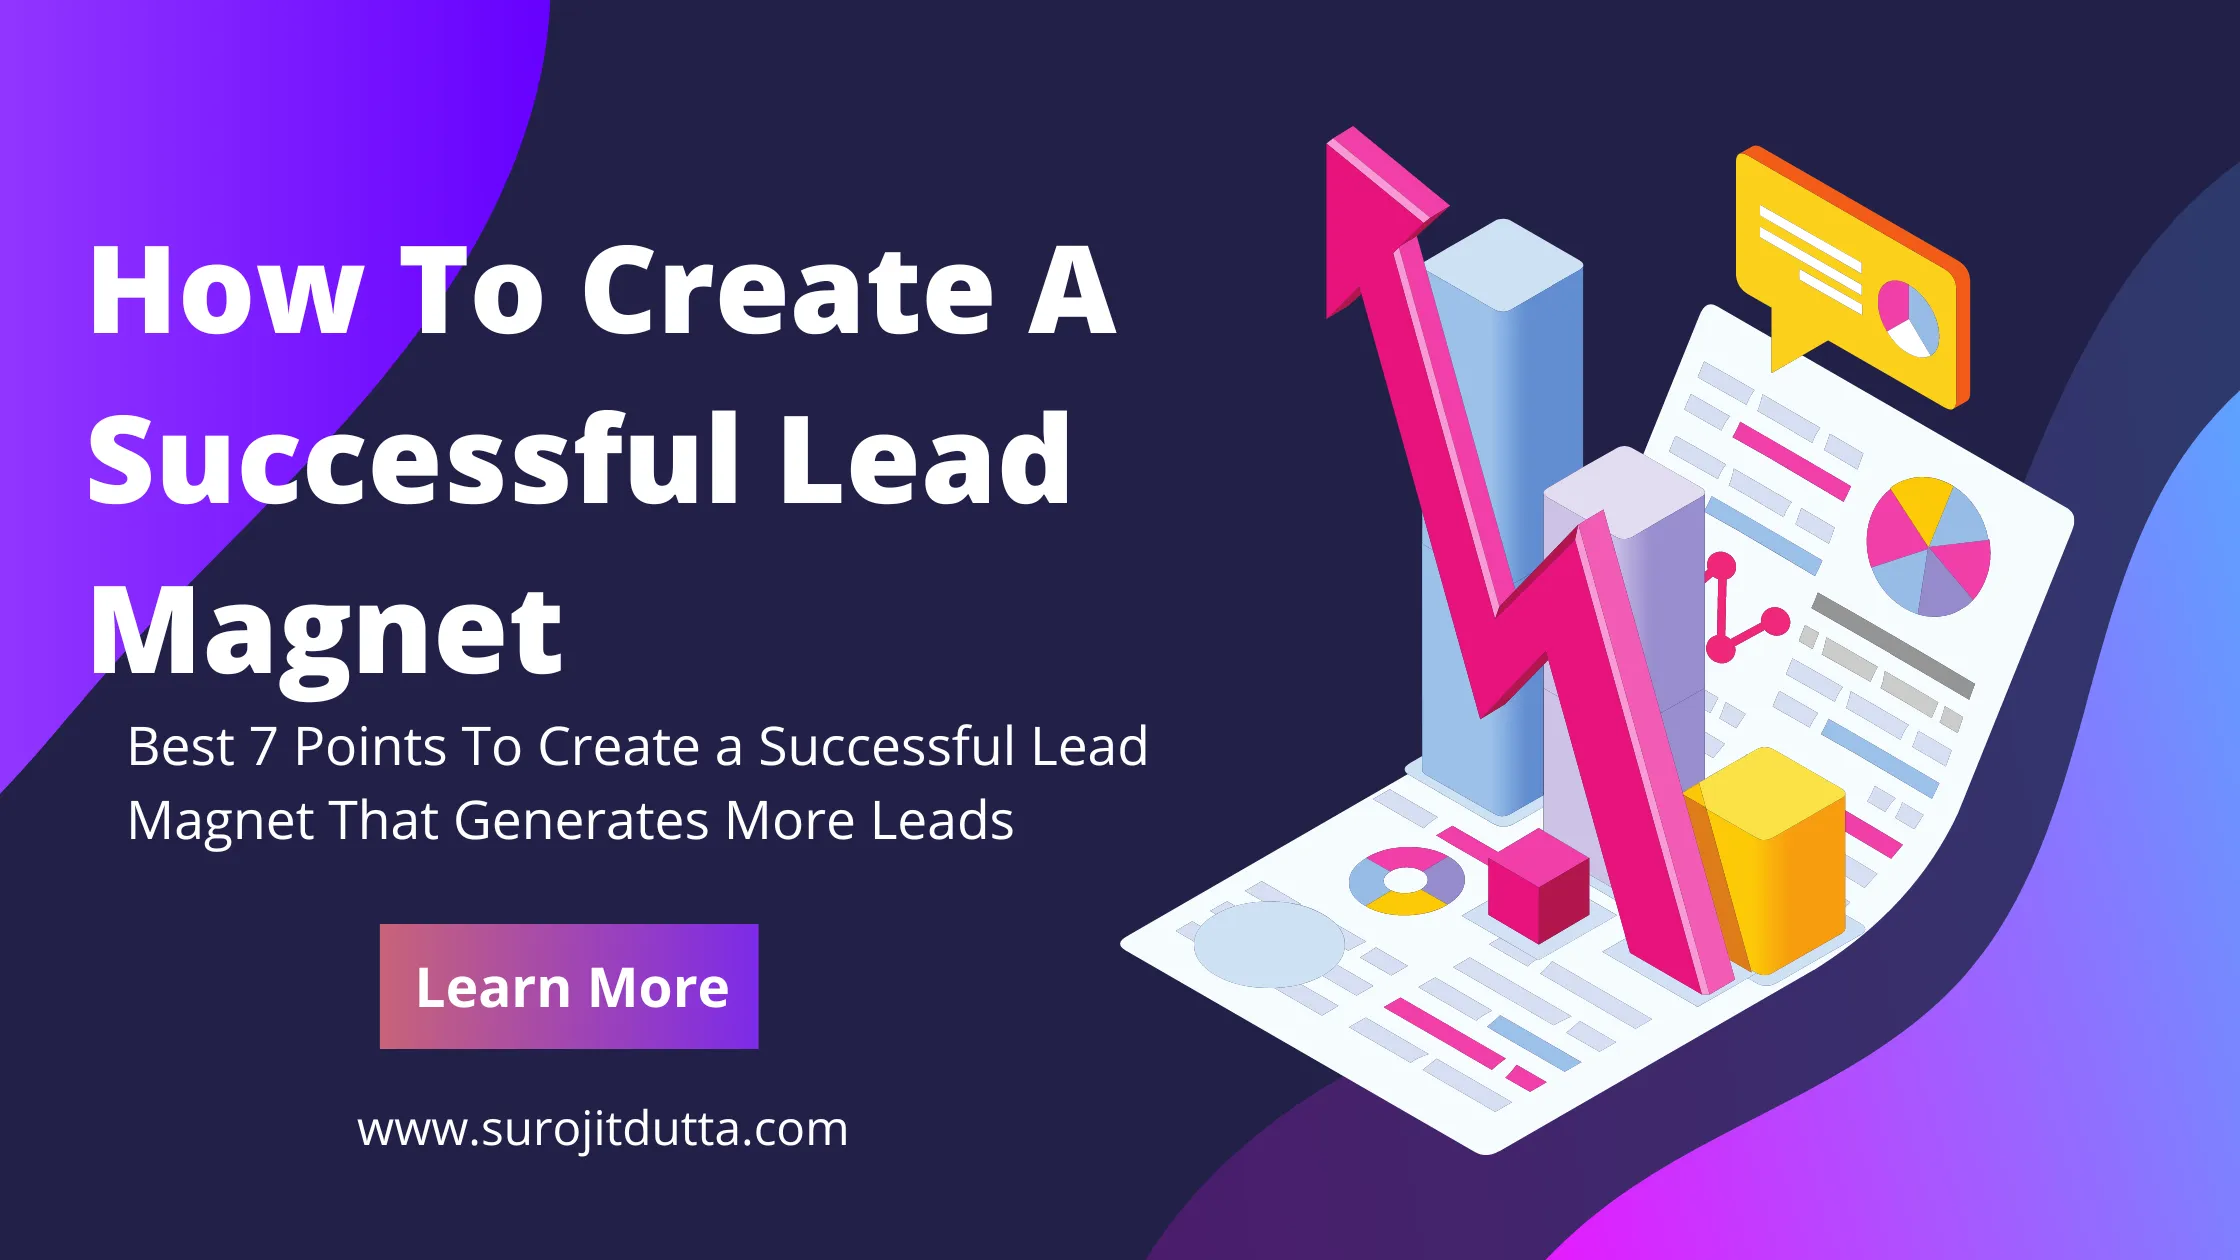 Best 7 Points To Successful Lead Magnet That Generates More Leads